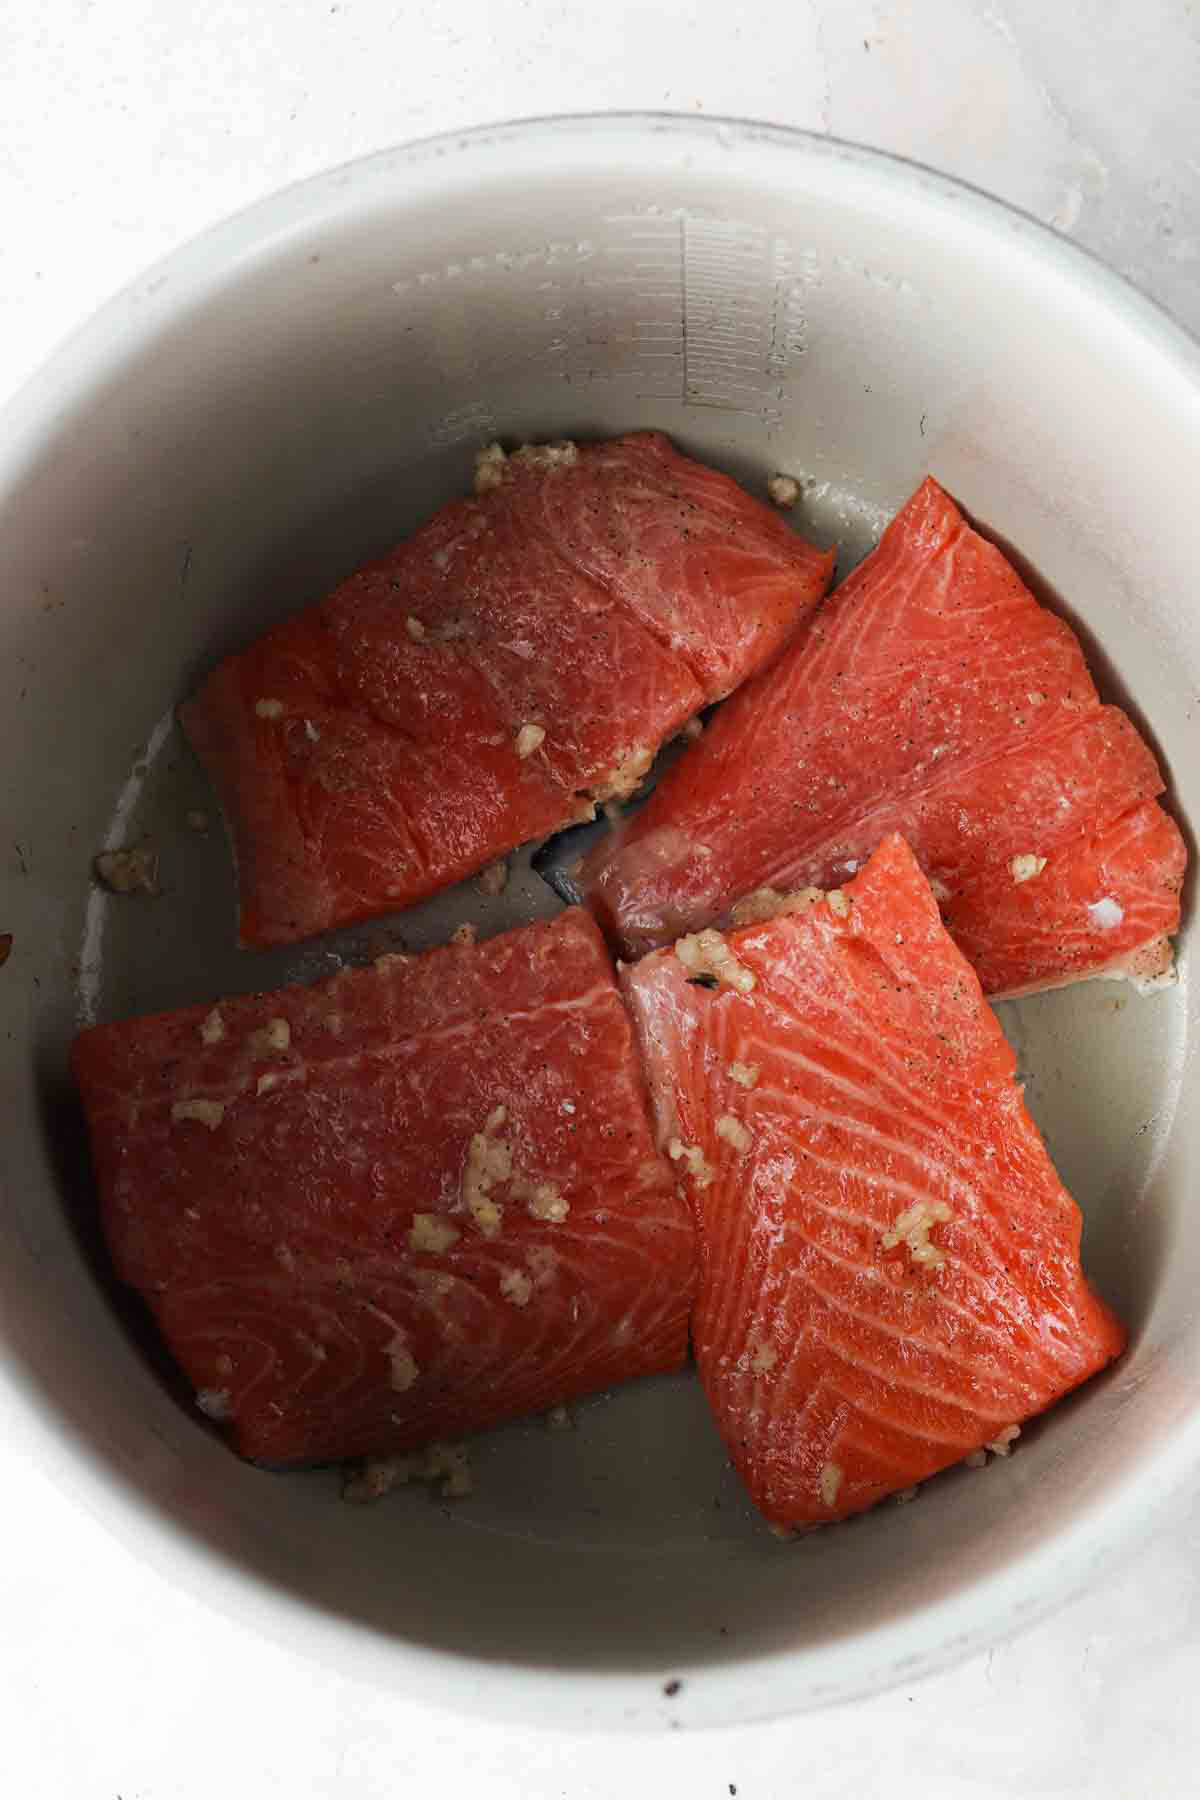 Salmon filets cut up in the air fryer facing up with seasoning and herbs on top.